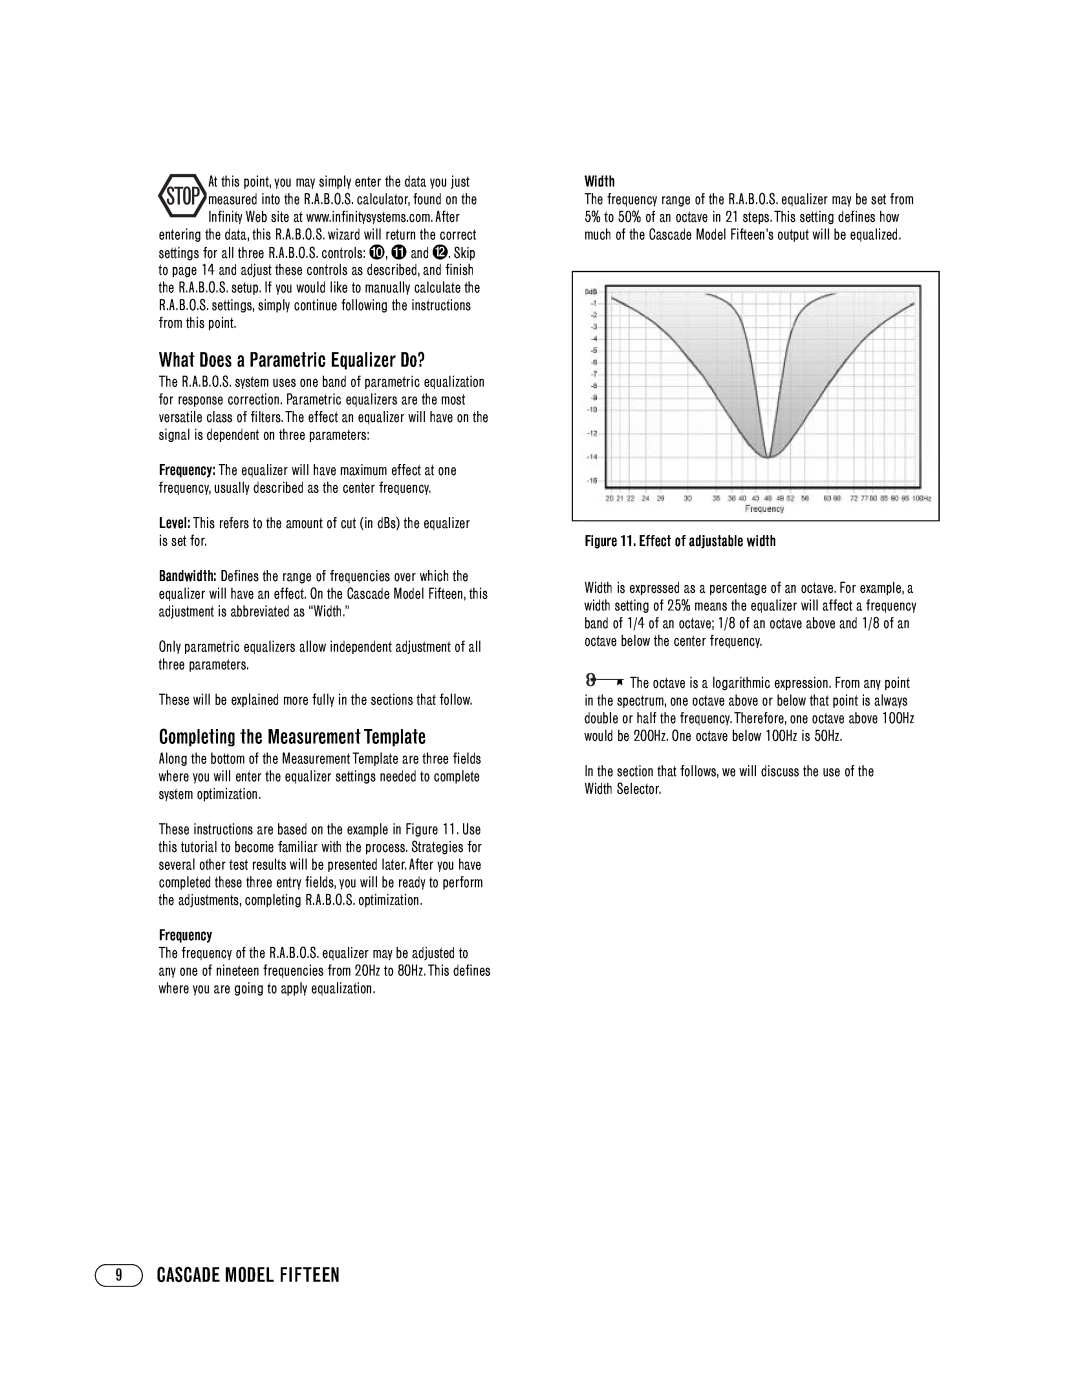 Infinity manual What Does a Parametric Equalizer Do?, Completing the Measurement Template, 9CASCADE MODEL FIFTEEN 